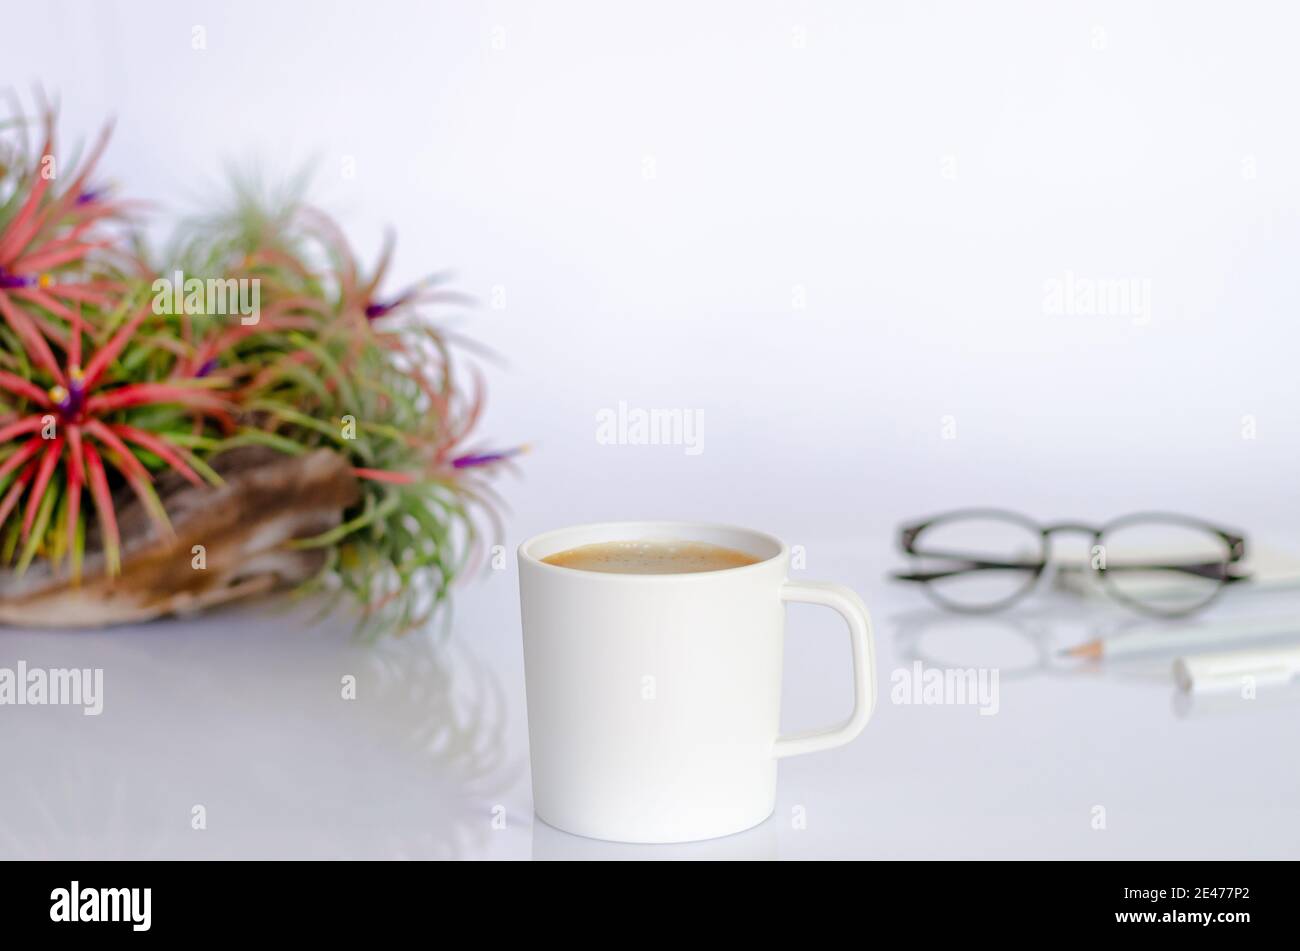 A cup of coffee on working table with air plant Tillandsia, spectacles, pen and pencil on white background. Stock Photo